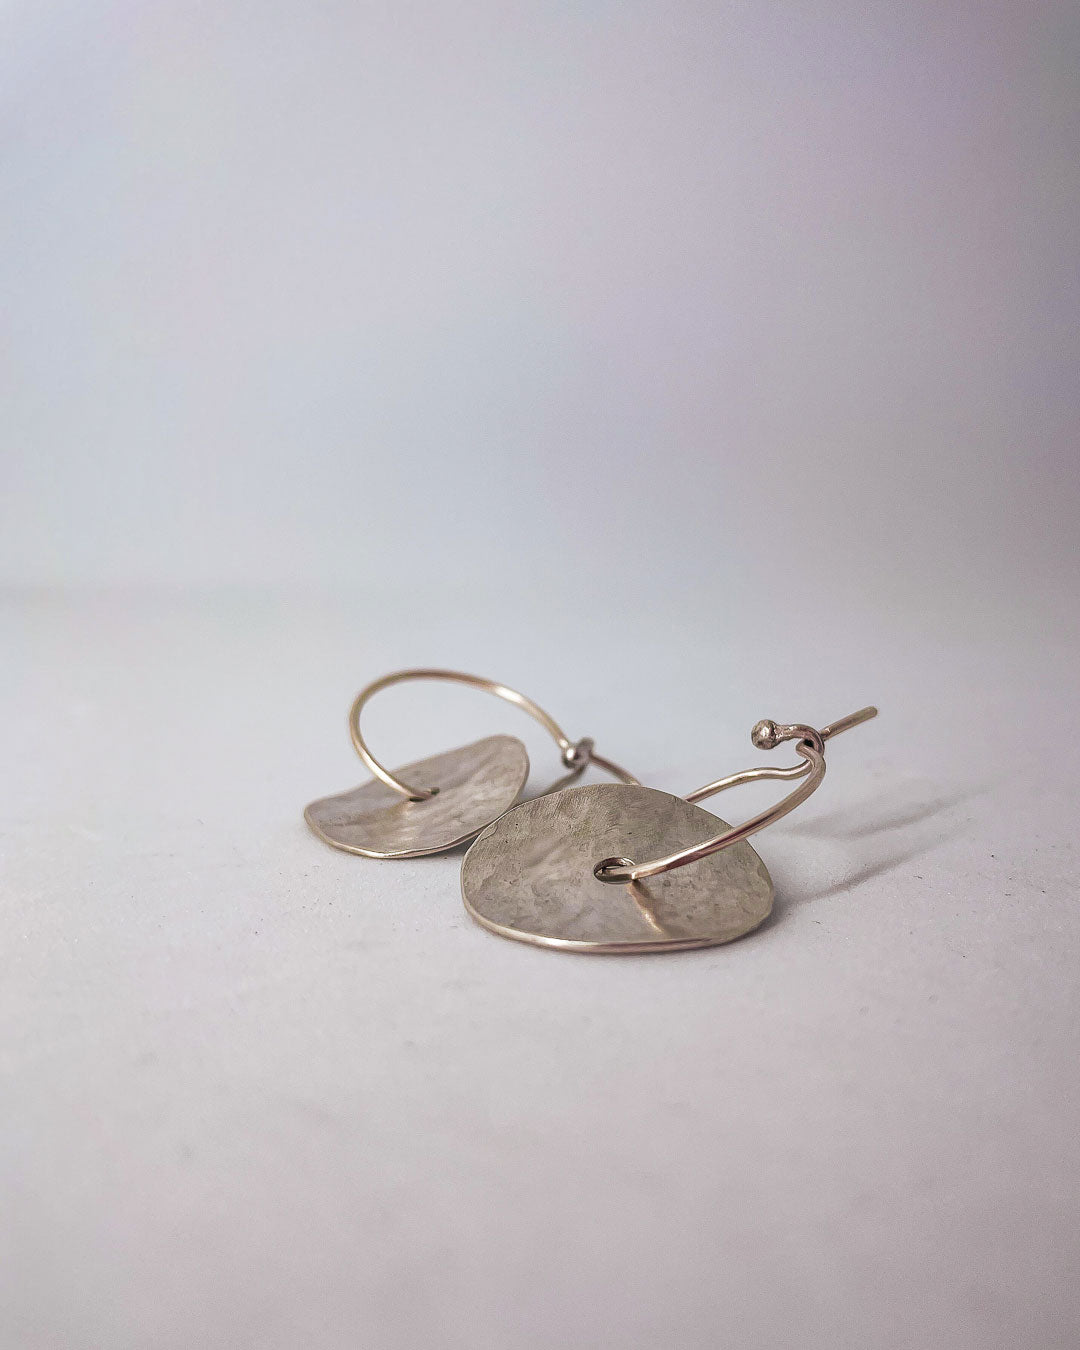 A pair of discs of Sterling Silver that sits on a hoop earring